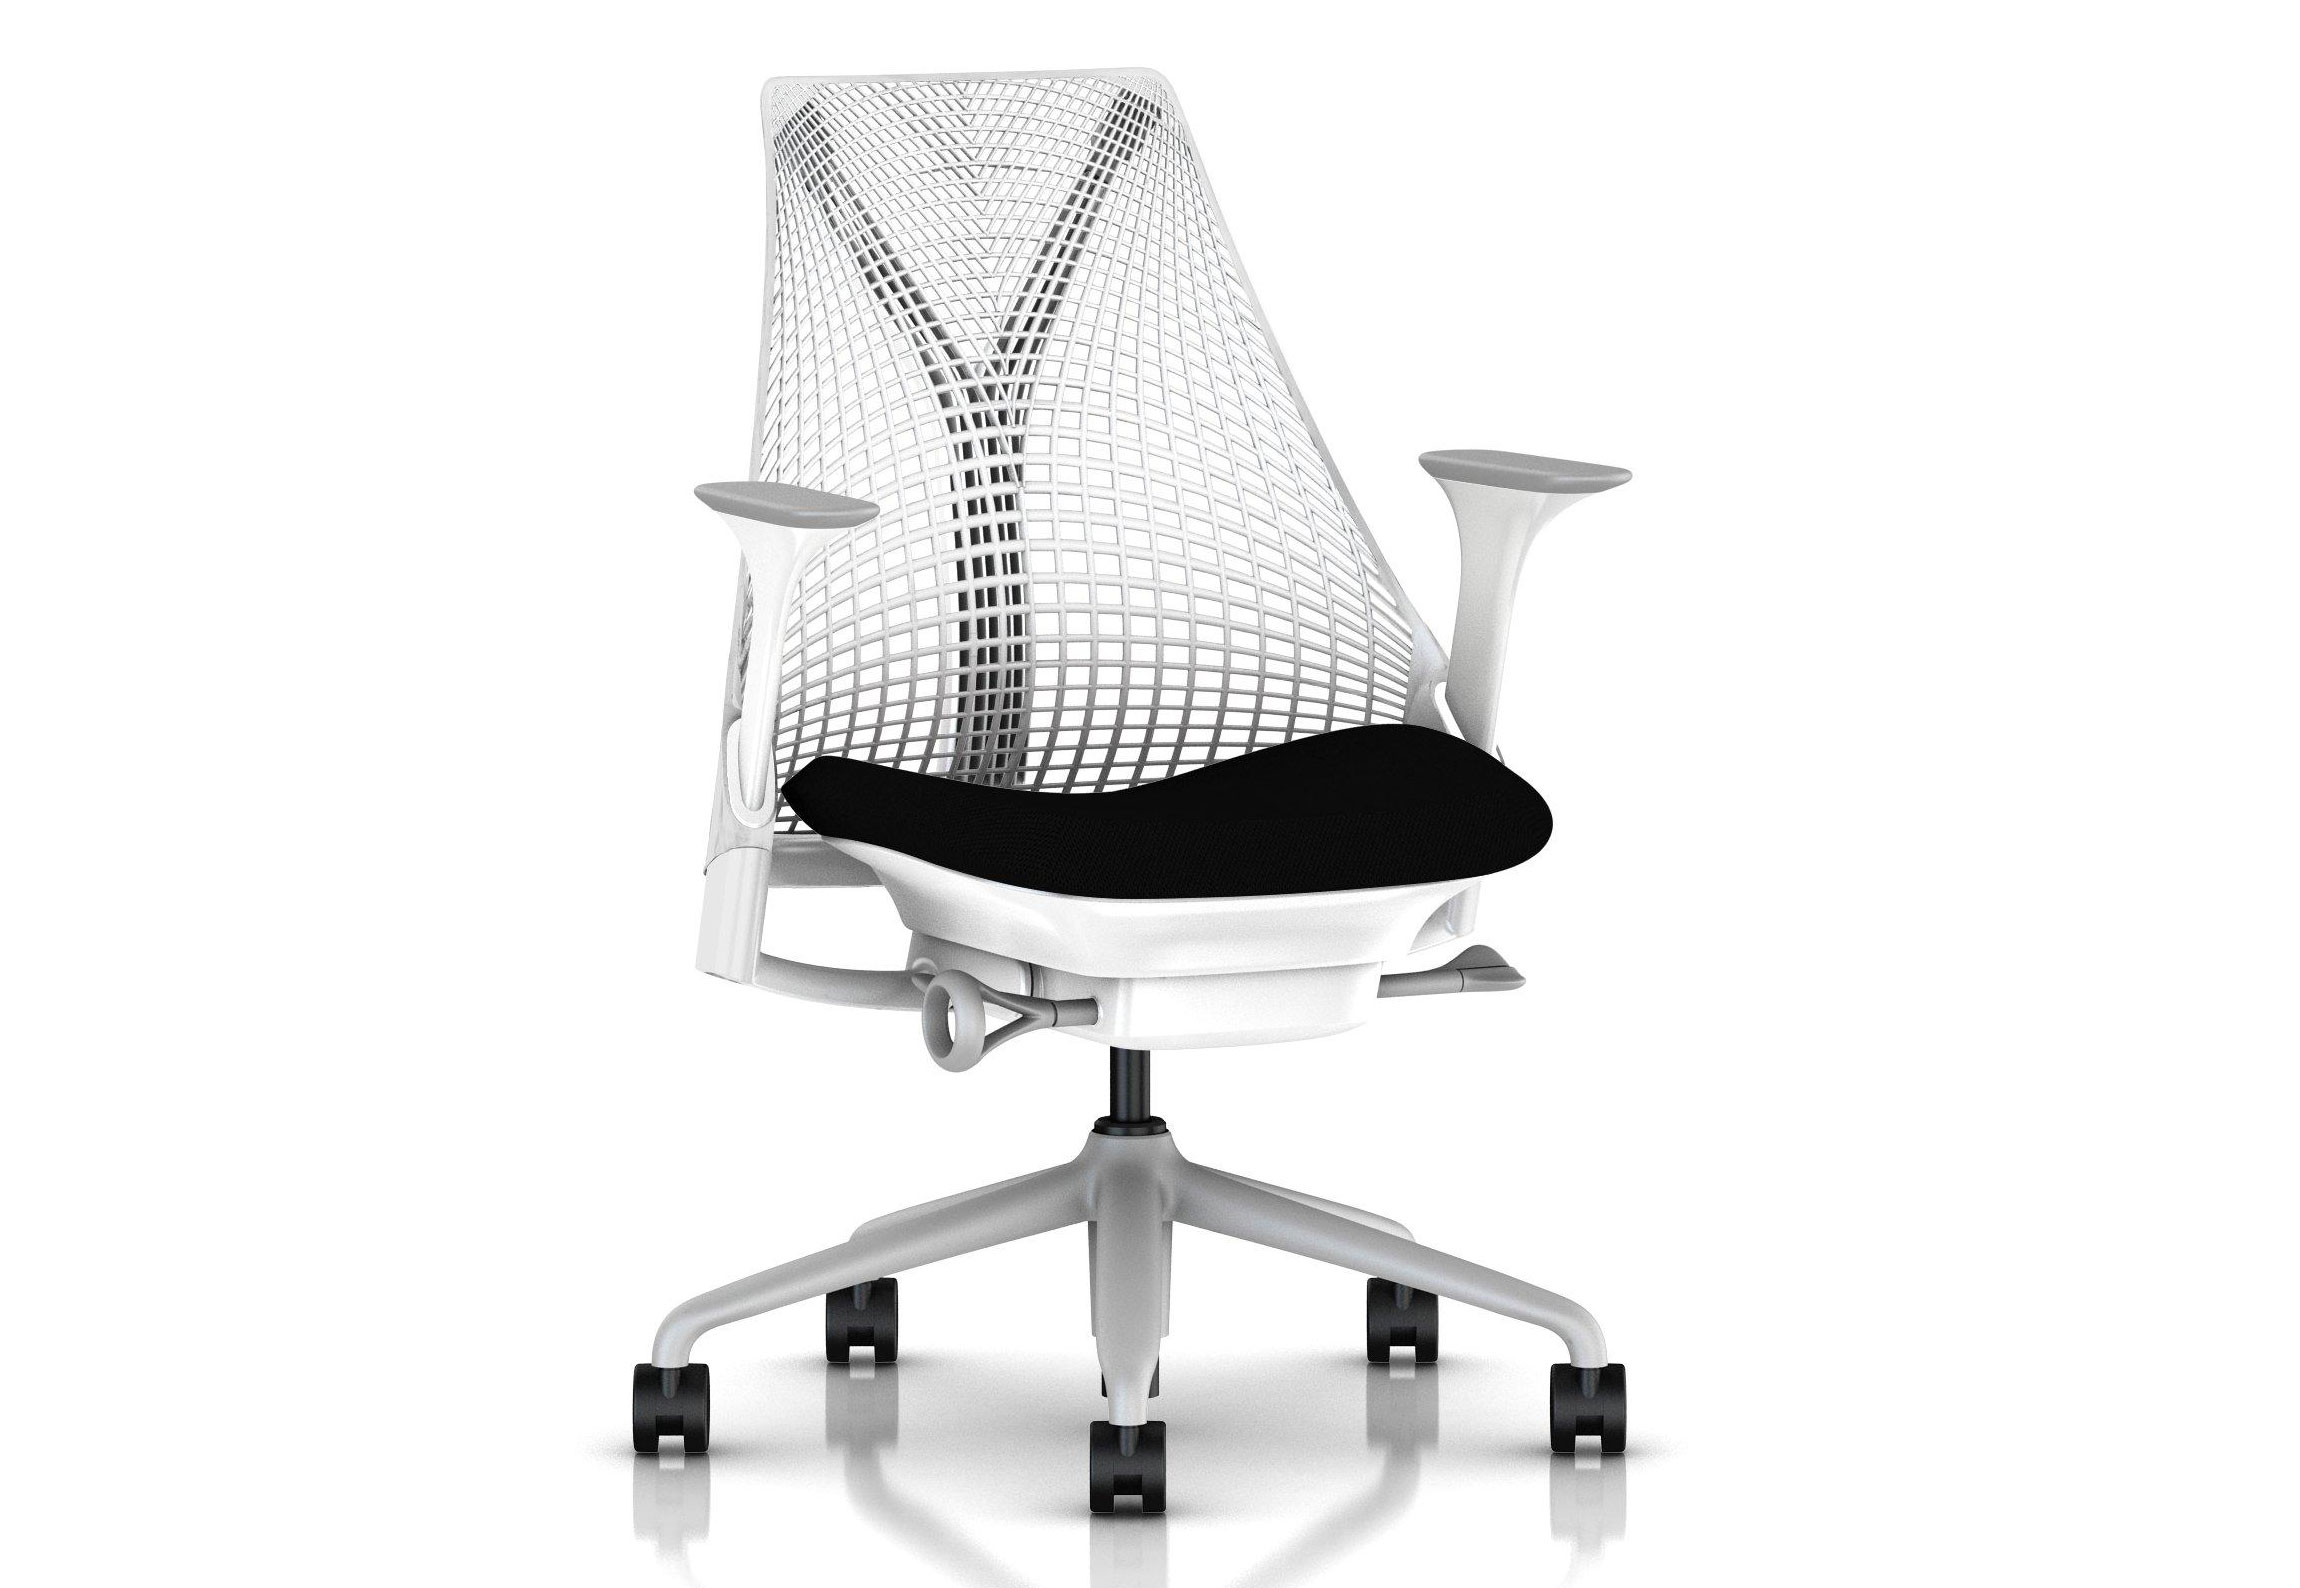 Best office chairs: Herman Miller Sayl office chair